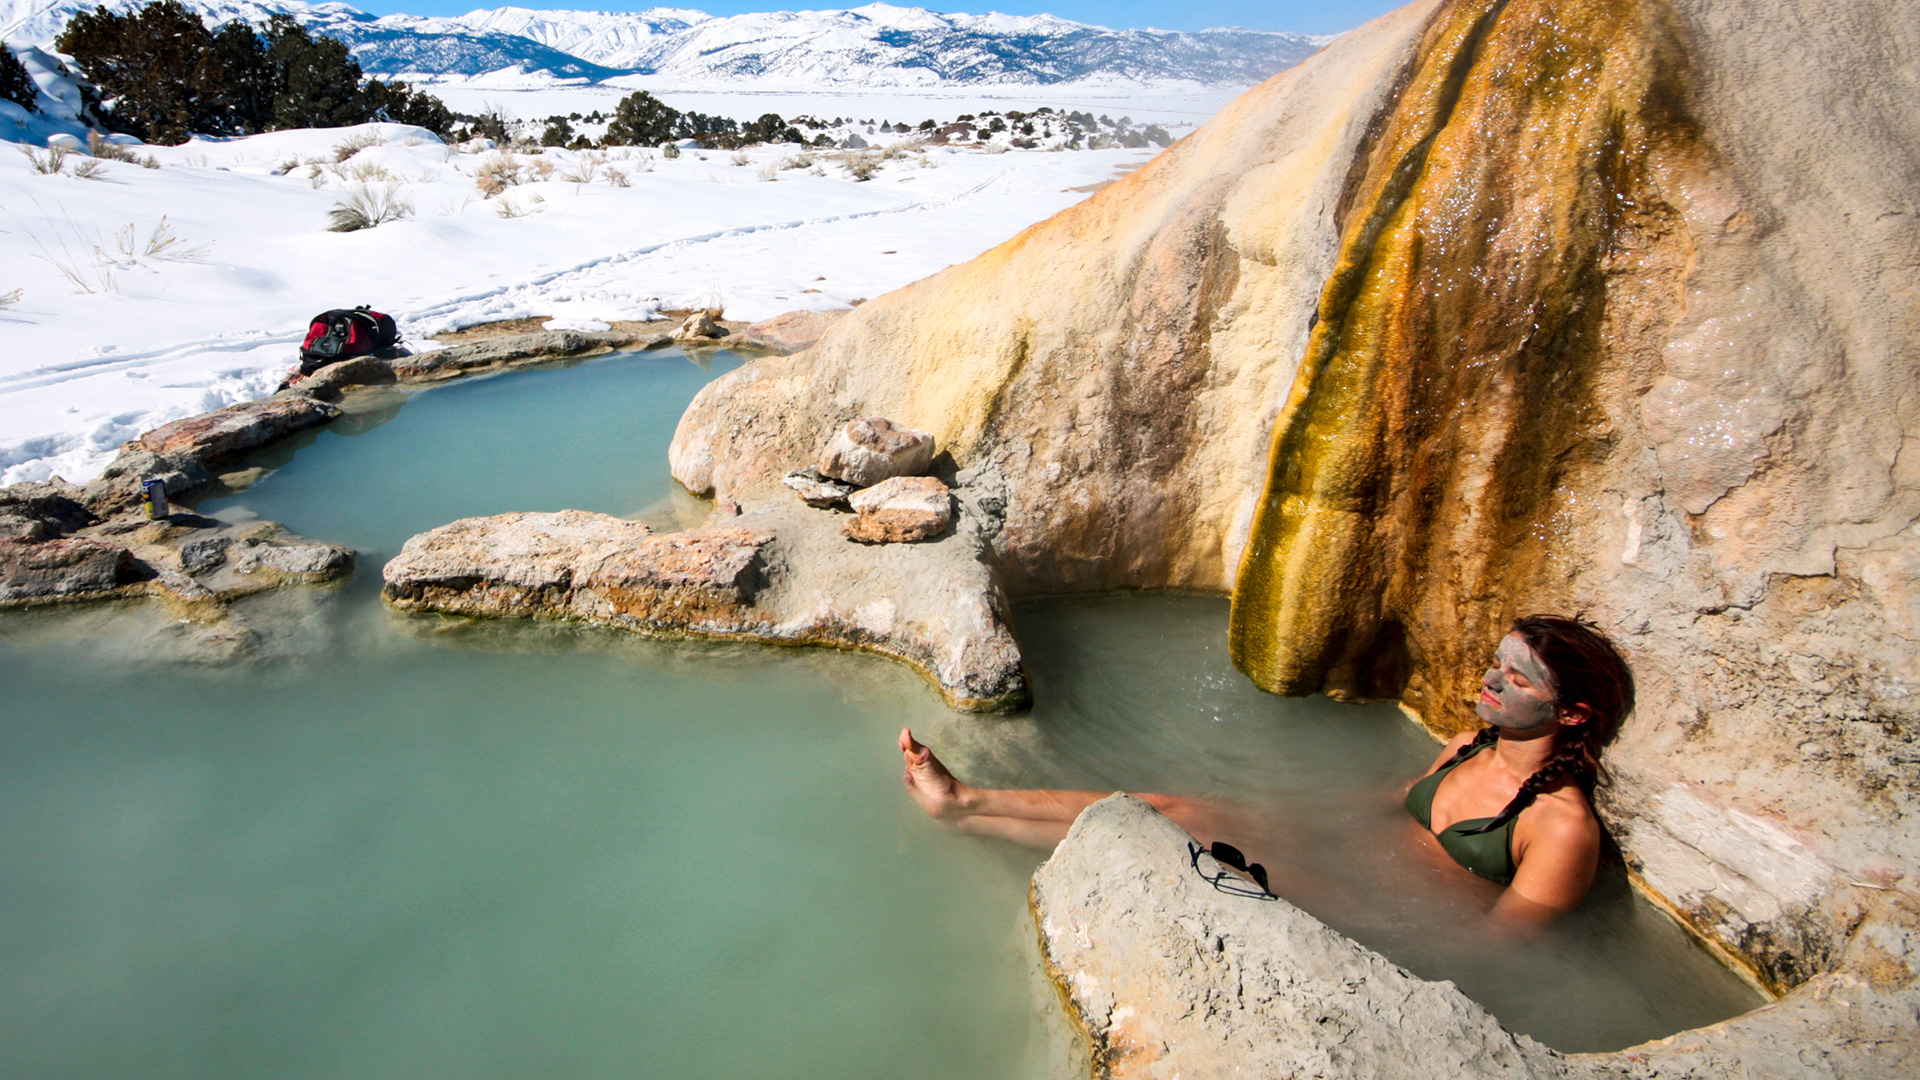 10 Best Hot Springs In The World.